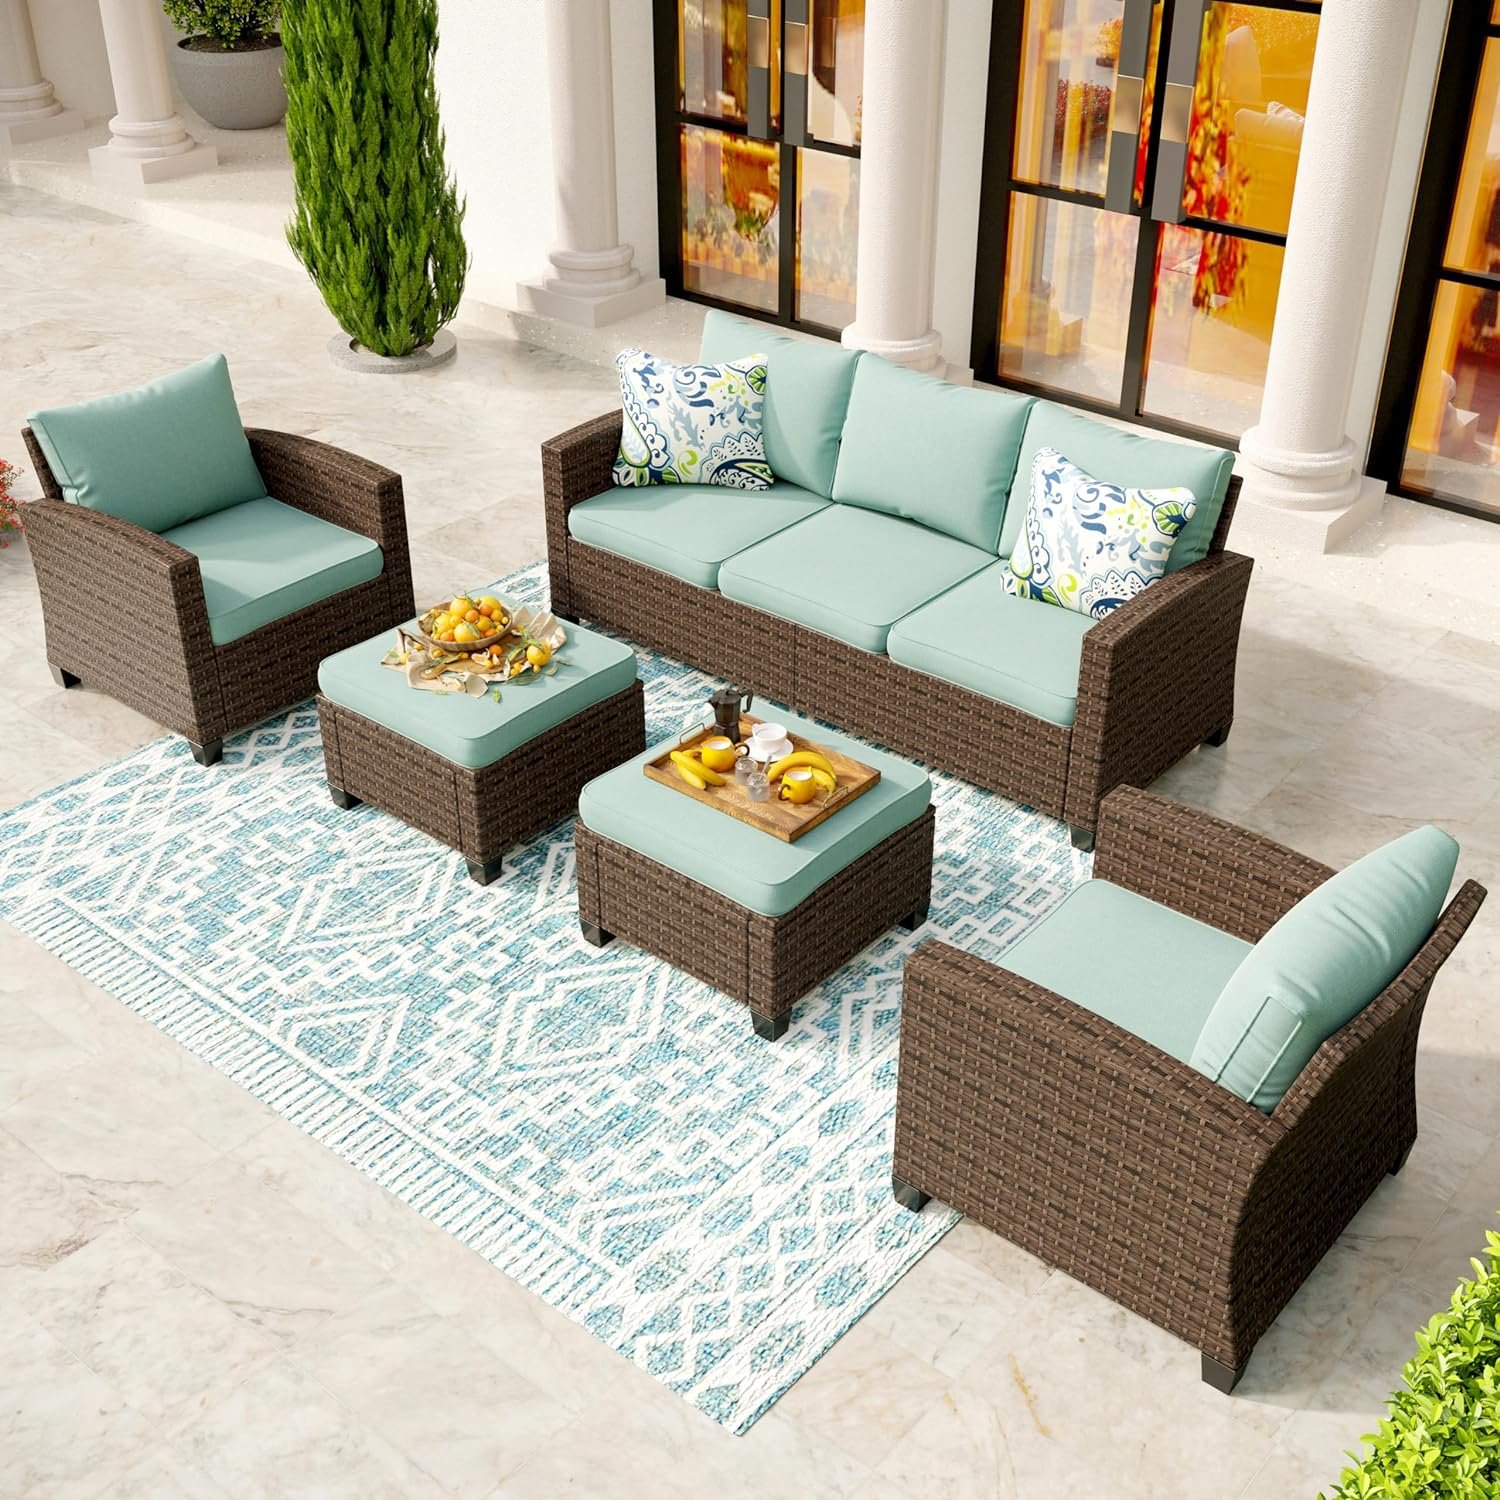 SUNSHINE VALLEY Patio Conversation Set Outdoor Furniture Wicker Rattan Sets with Cushion Sectional Furniture,5-Pcs 7 Seats,Blue